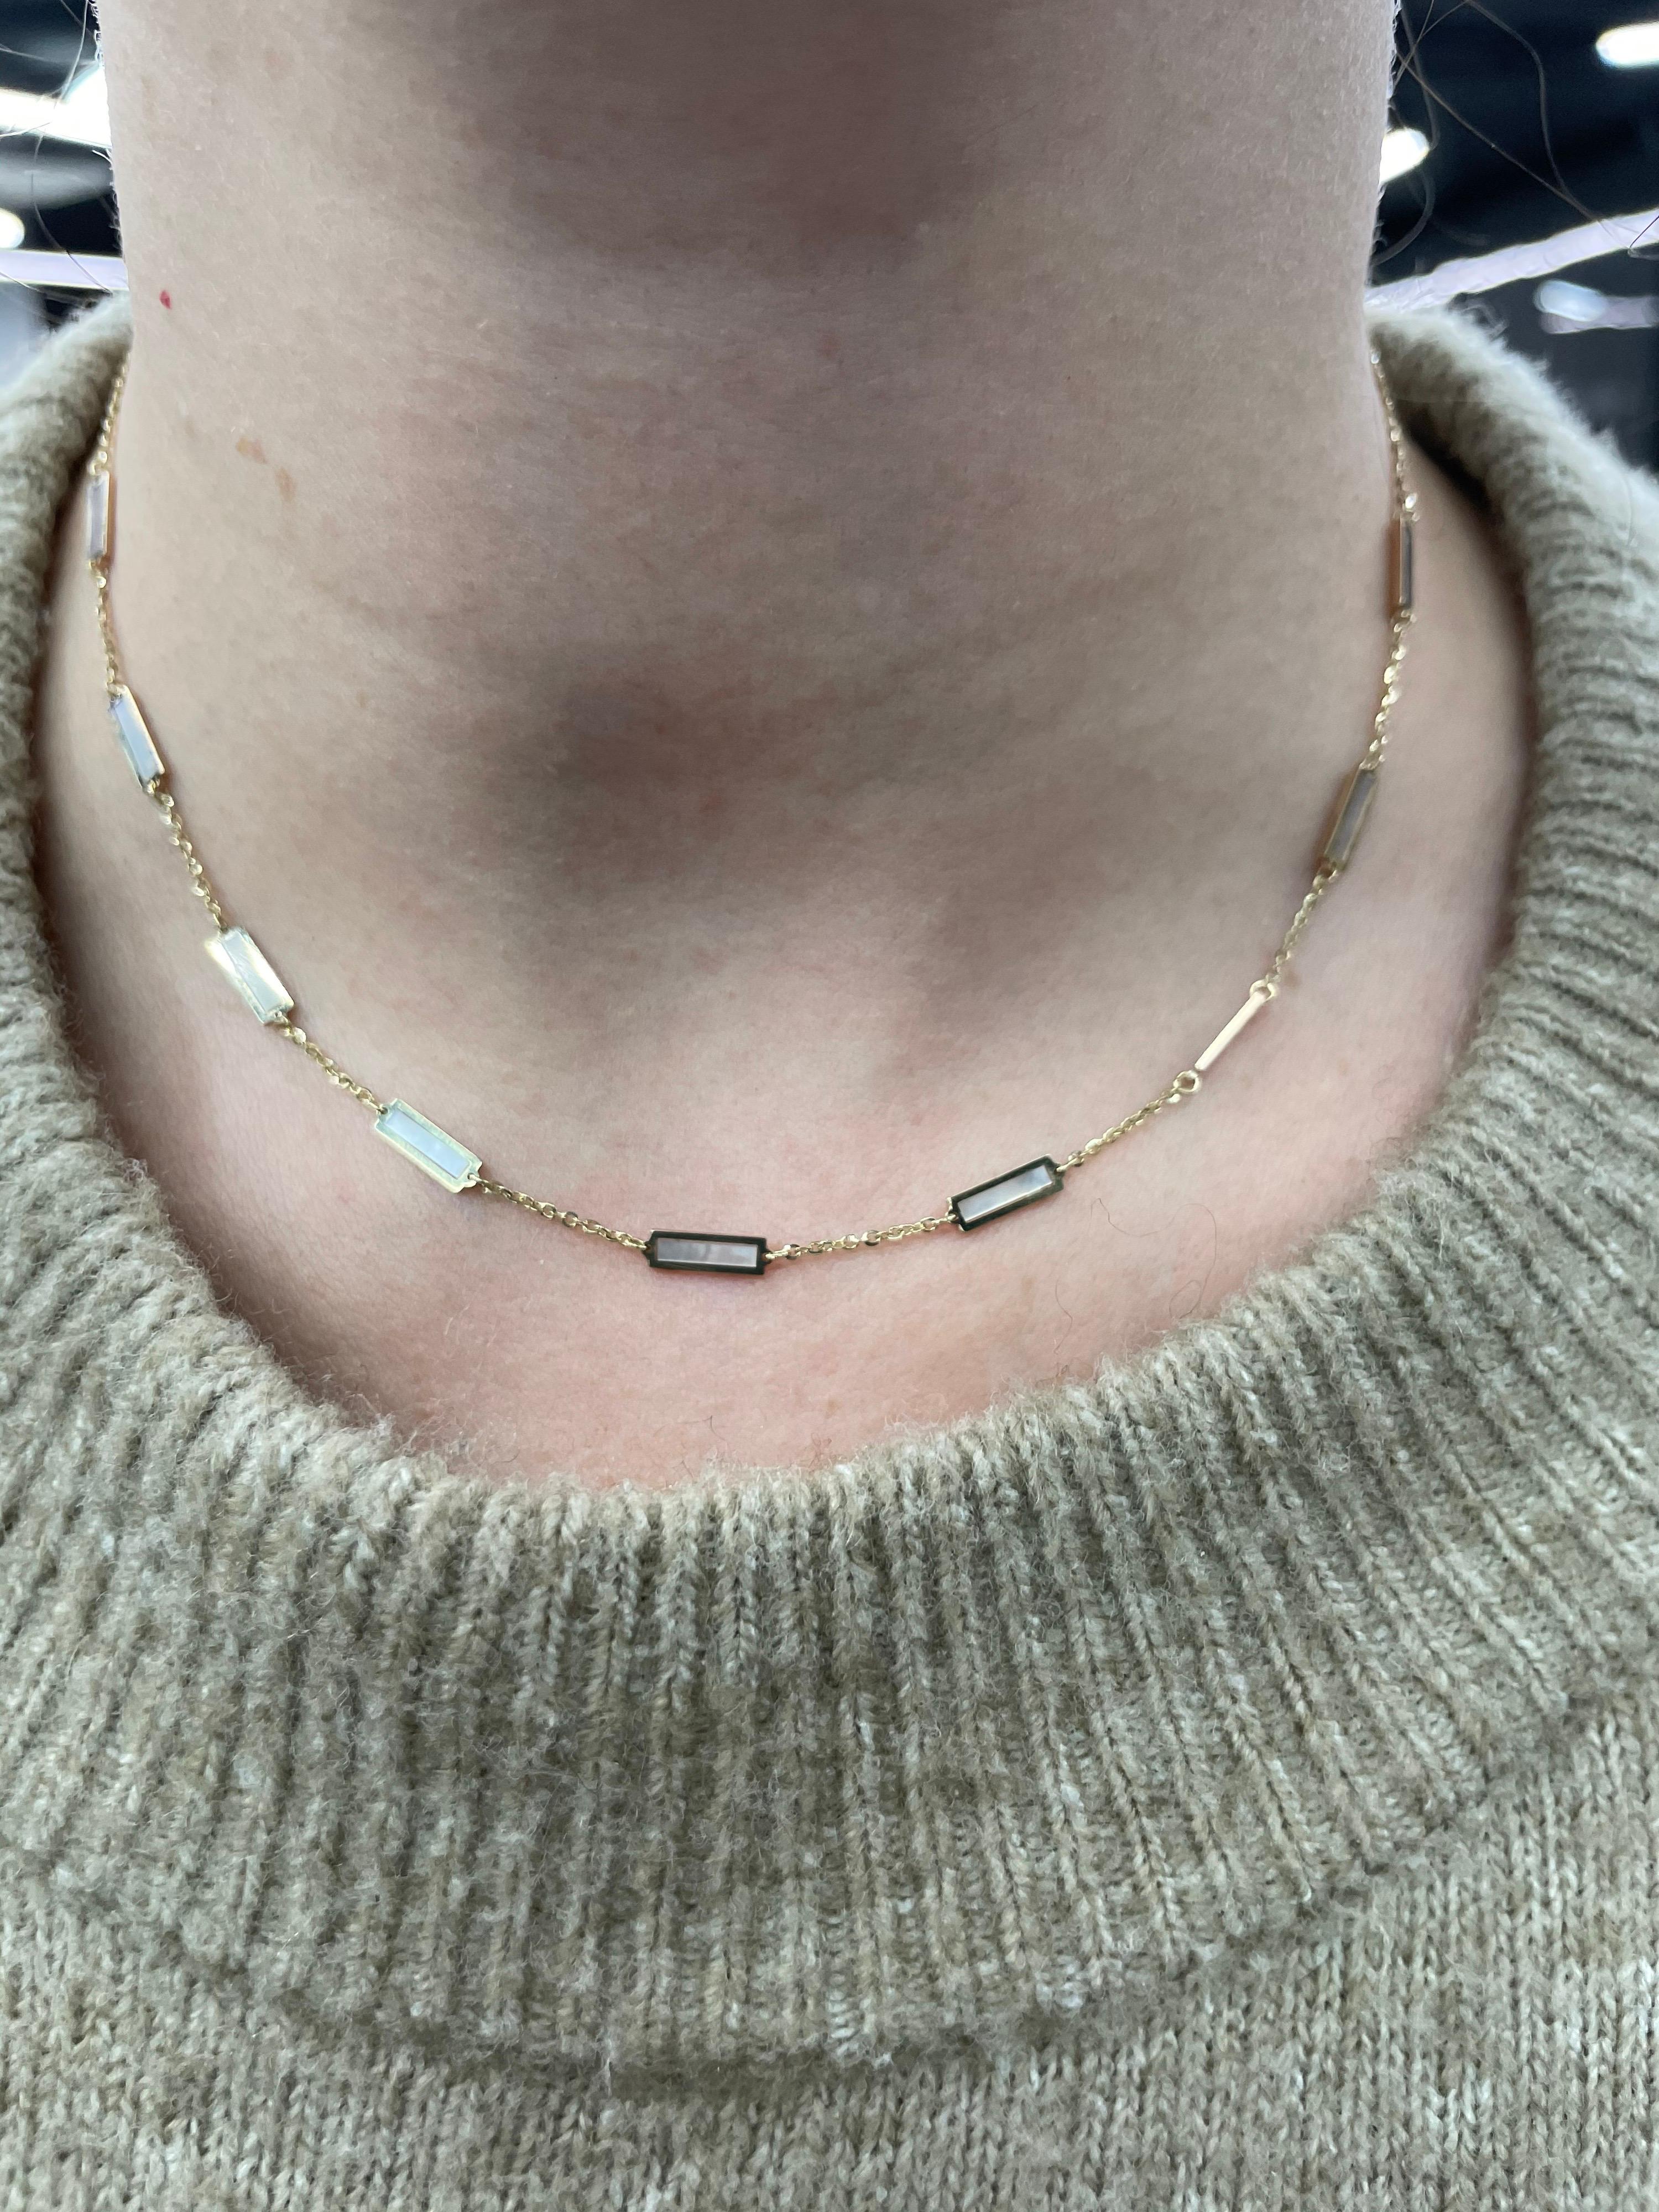 Italian 14k yellow gold necklace featuring Mother of Pearl and gold trim bars. Super trendy and great for layering!
Available in different colors and styles.
Email to inquire.